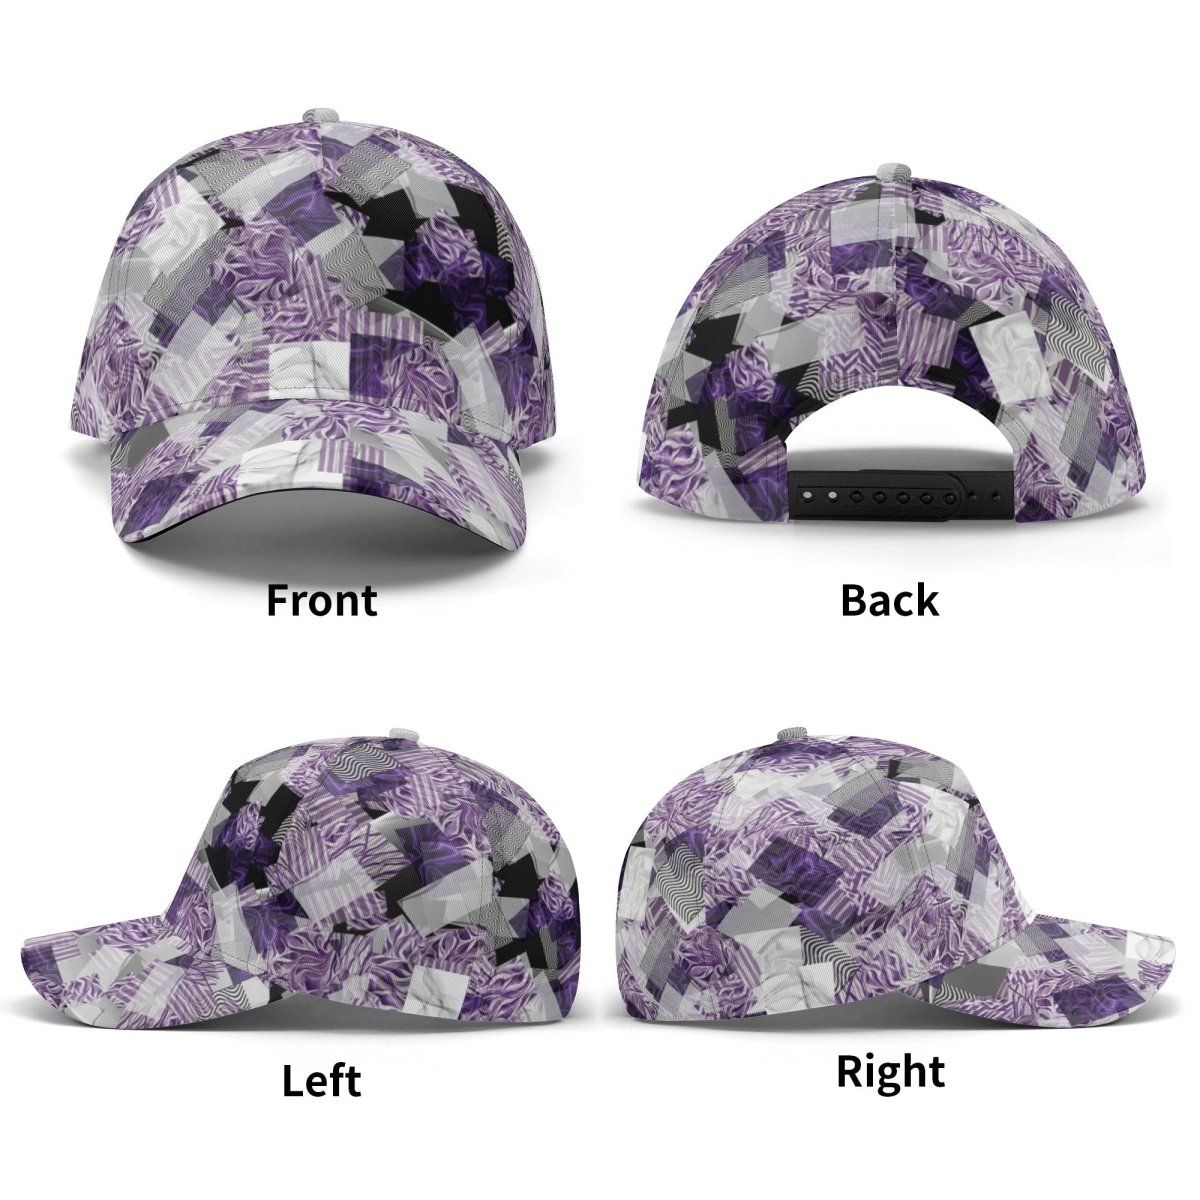 Stylish Lilac and Purple All-over Print Baseball Cap with Black Accents - Perfect for Any Outfit - Iron Phoenix GHG